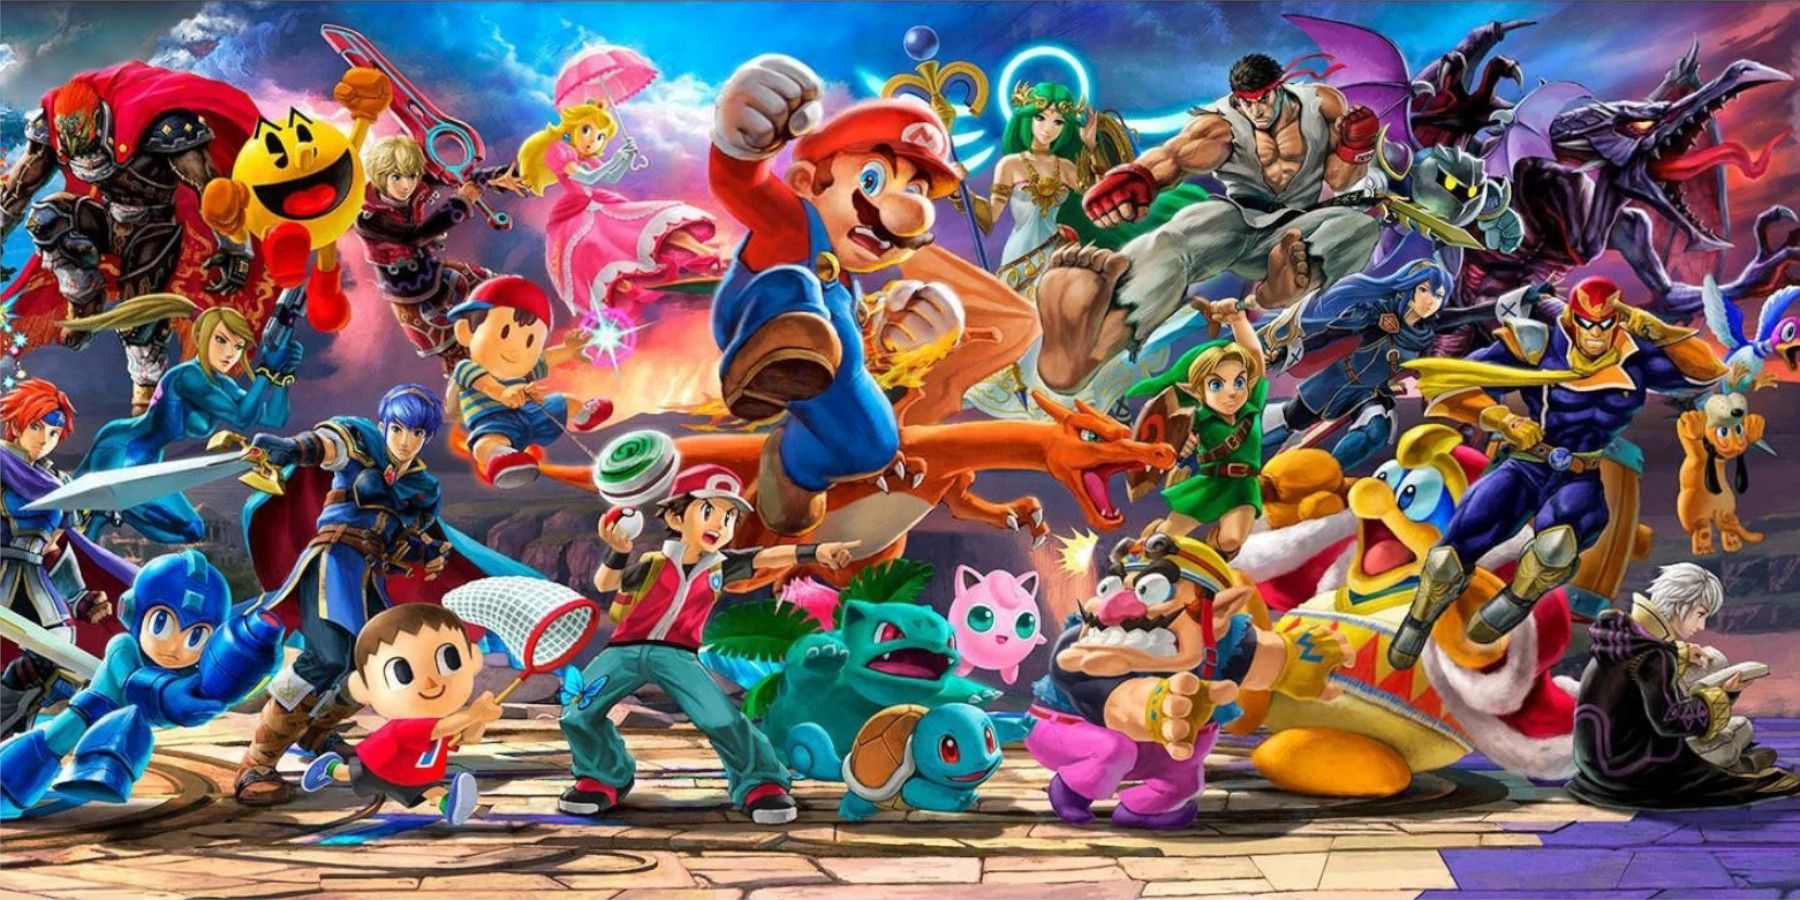 All of the Super Smash Bros. Ultimate DLC Fighters So Far